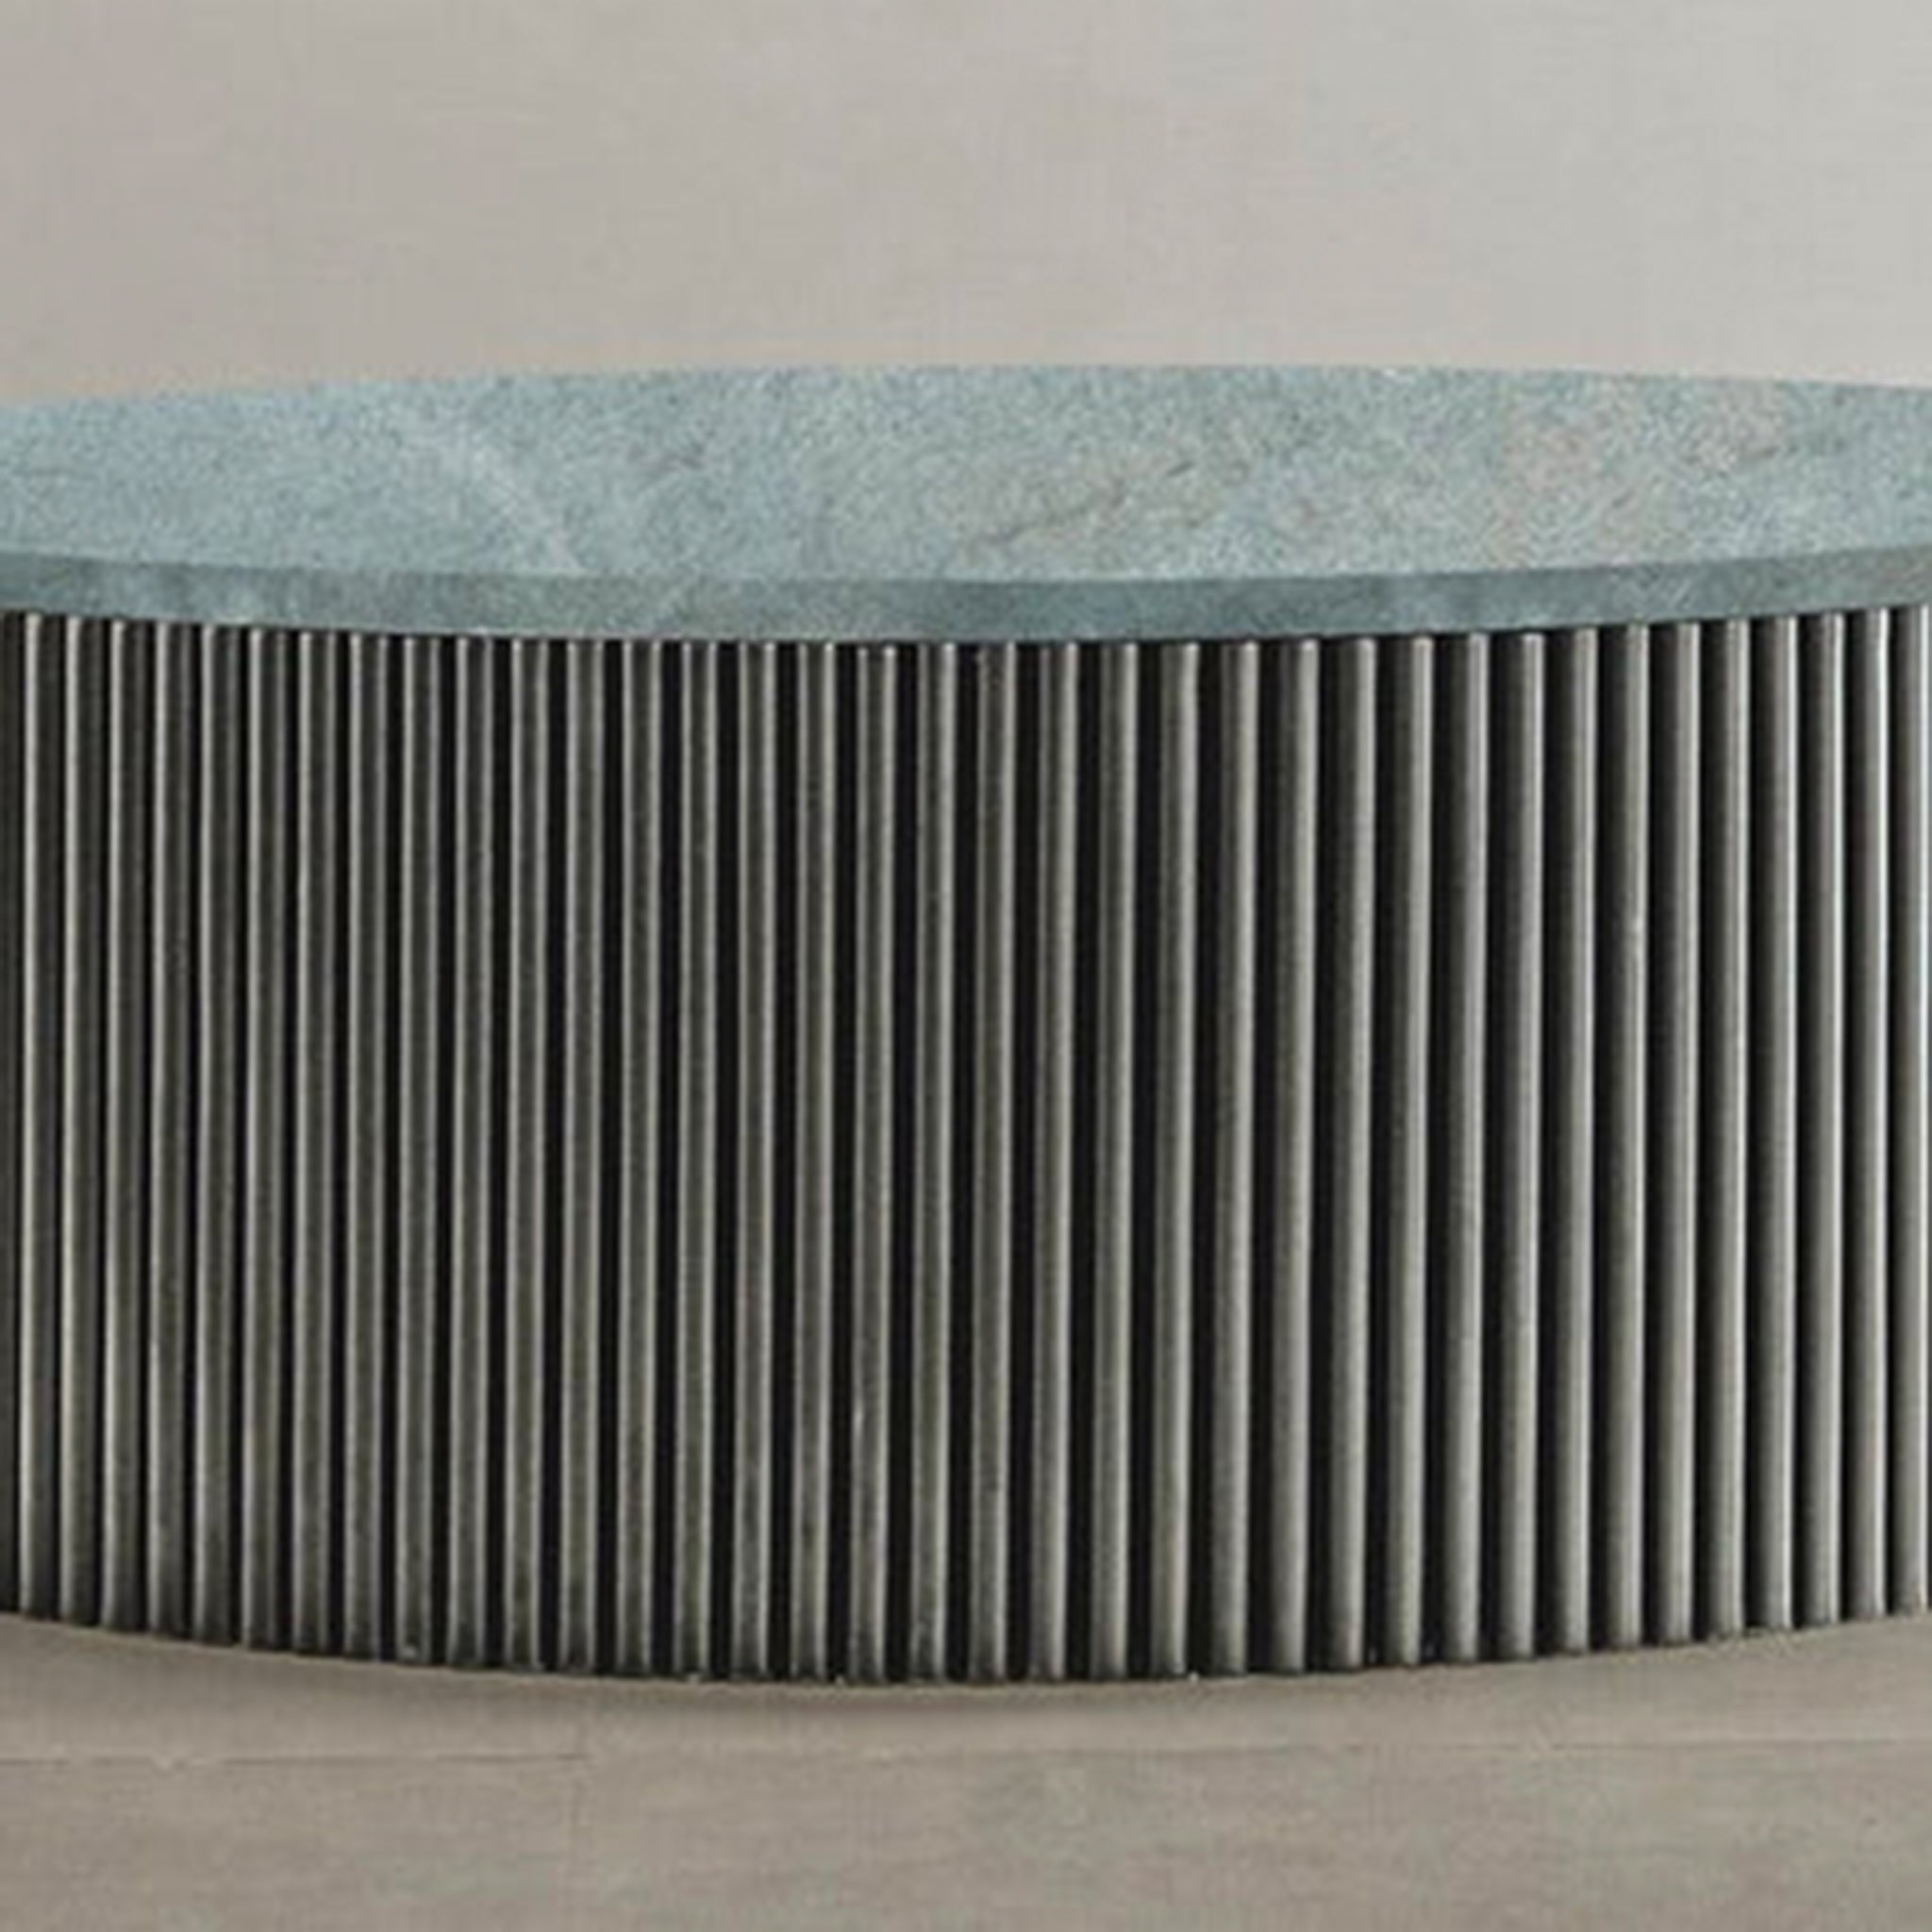 "Sophisticated circular coffee table with unique ribbed pattern"